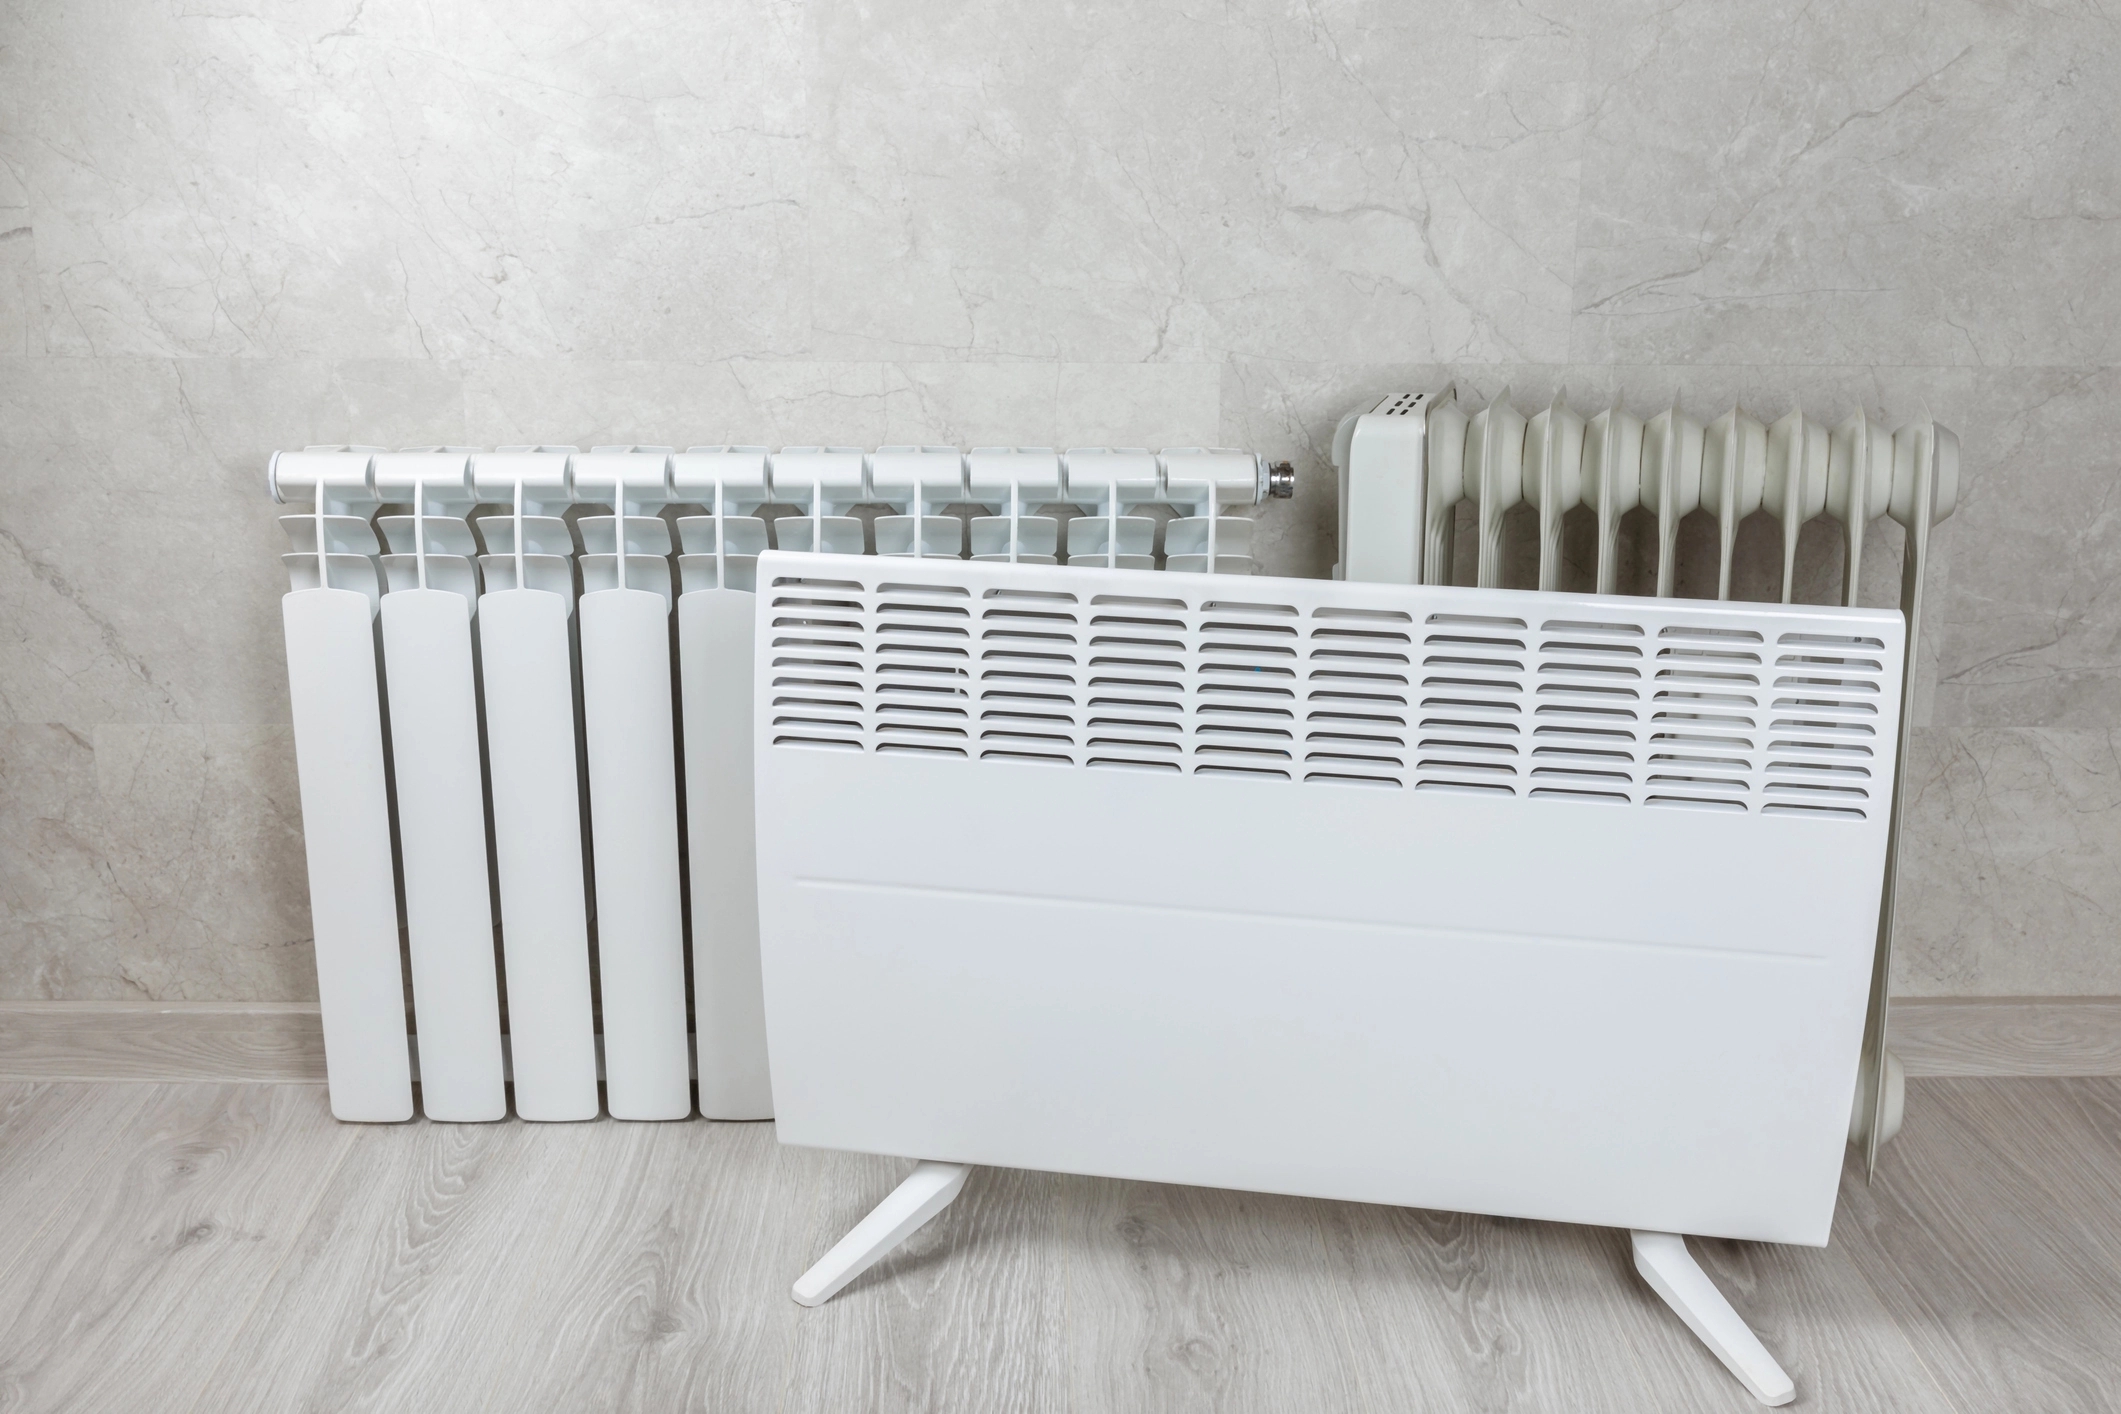 An image of 3 different types of radiators with different designs and aesthetics